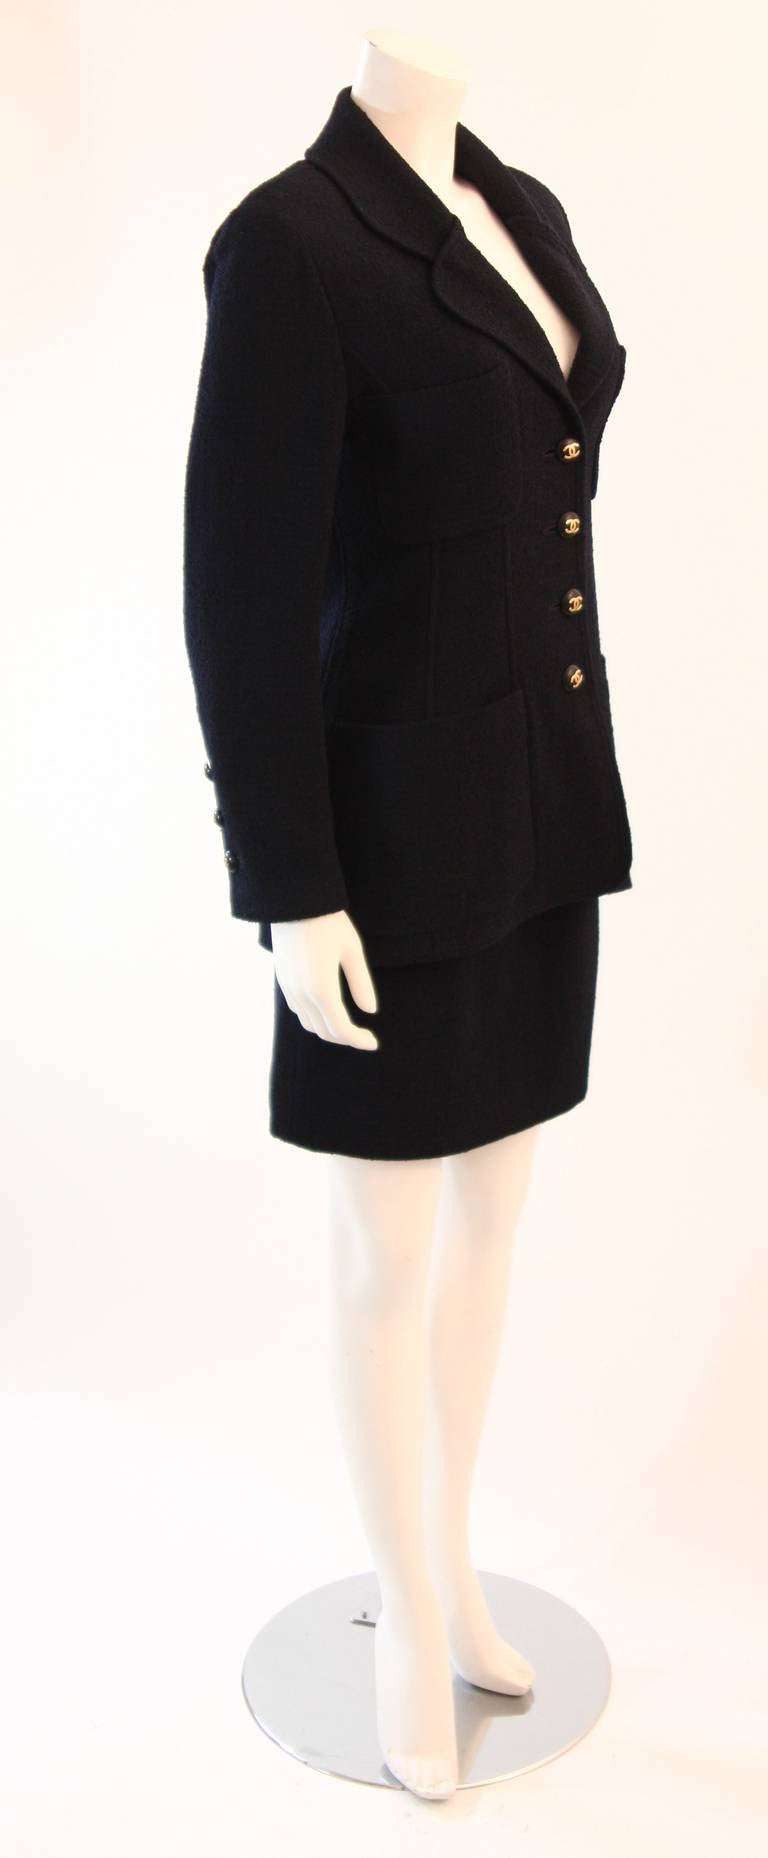 Women's 1993 C Chanel Navy Boucle Jacket and skirt suit with CC logo buttons